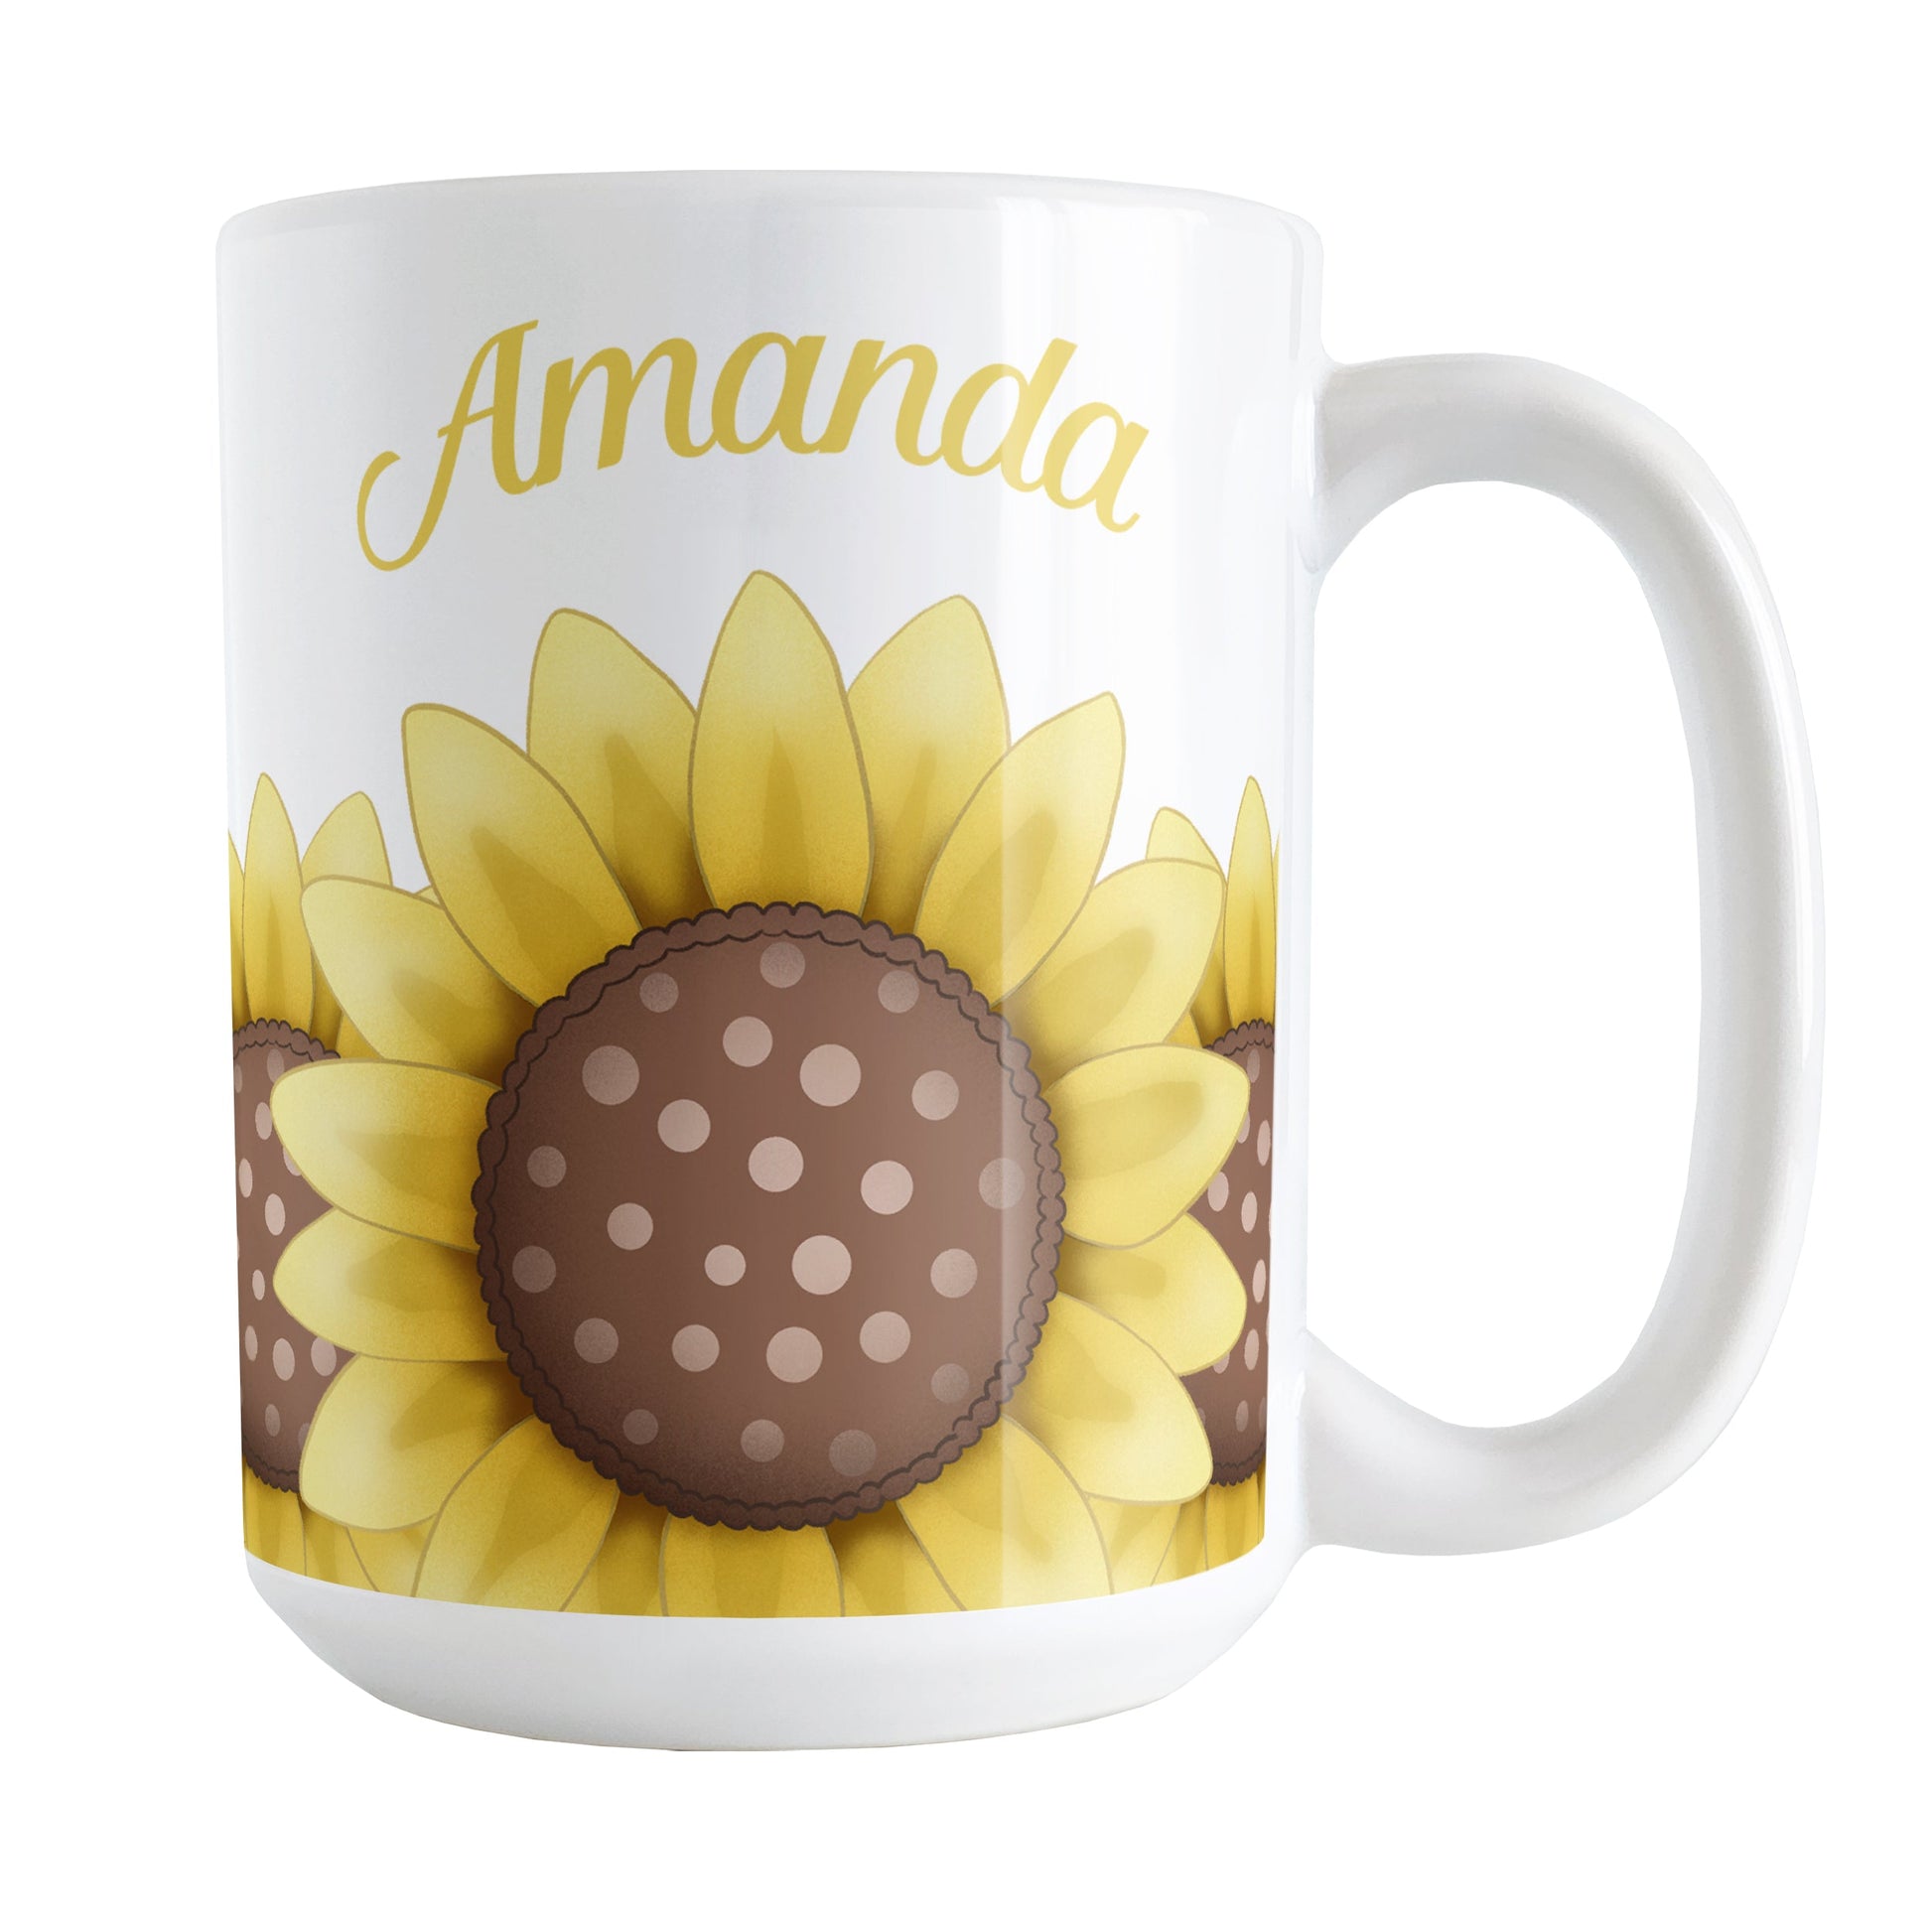 Personalized Sunflower Mug (15oz) at Amy's Coffee Mugs. A ceramic coffee mug designed with an illustration of big yellow sunflowers with a dotted brown centers along the bottom of this floral mug. Your personalized name is custom printed in a curved yellow script font above the sunflowers on both sides of the mug.